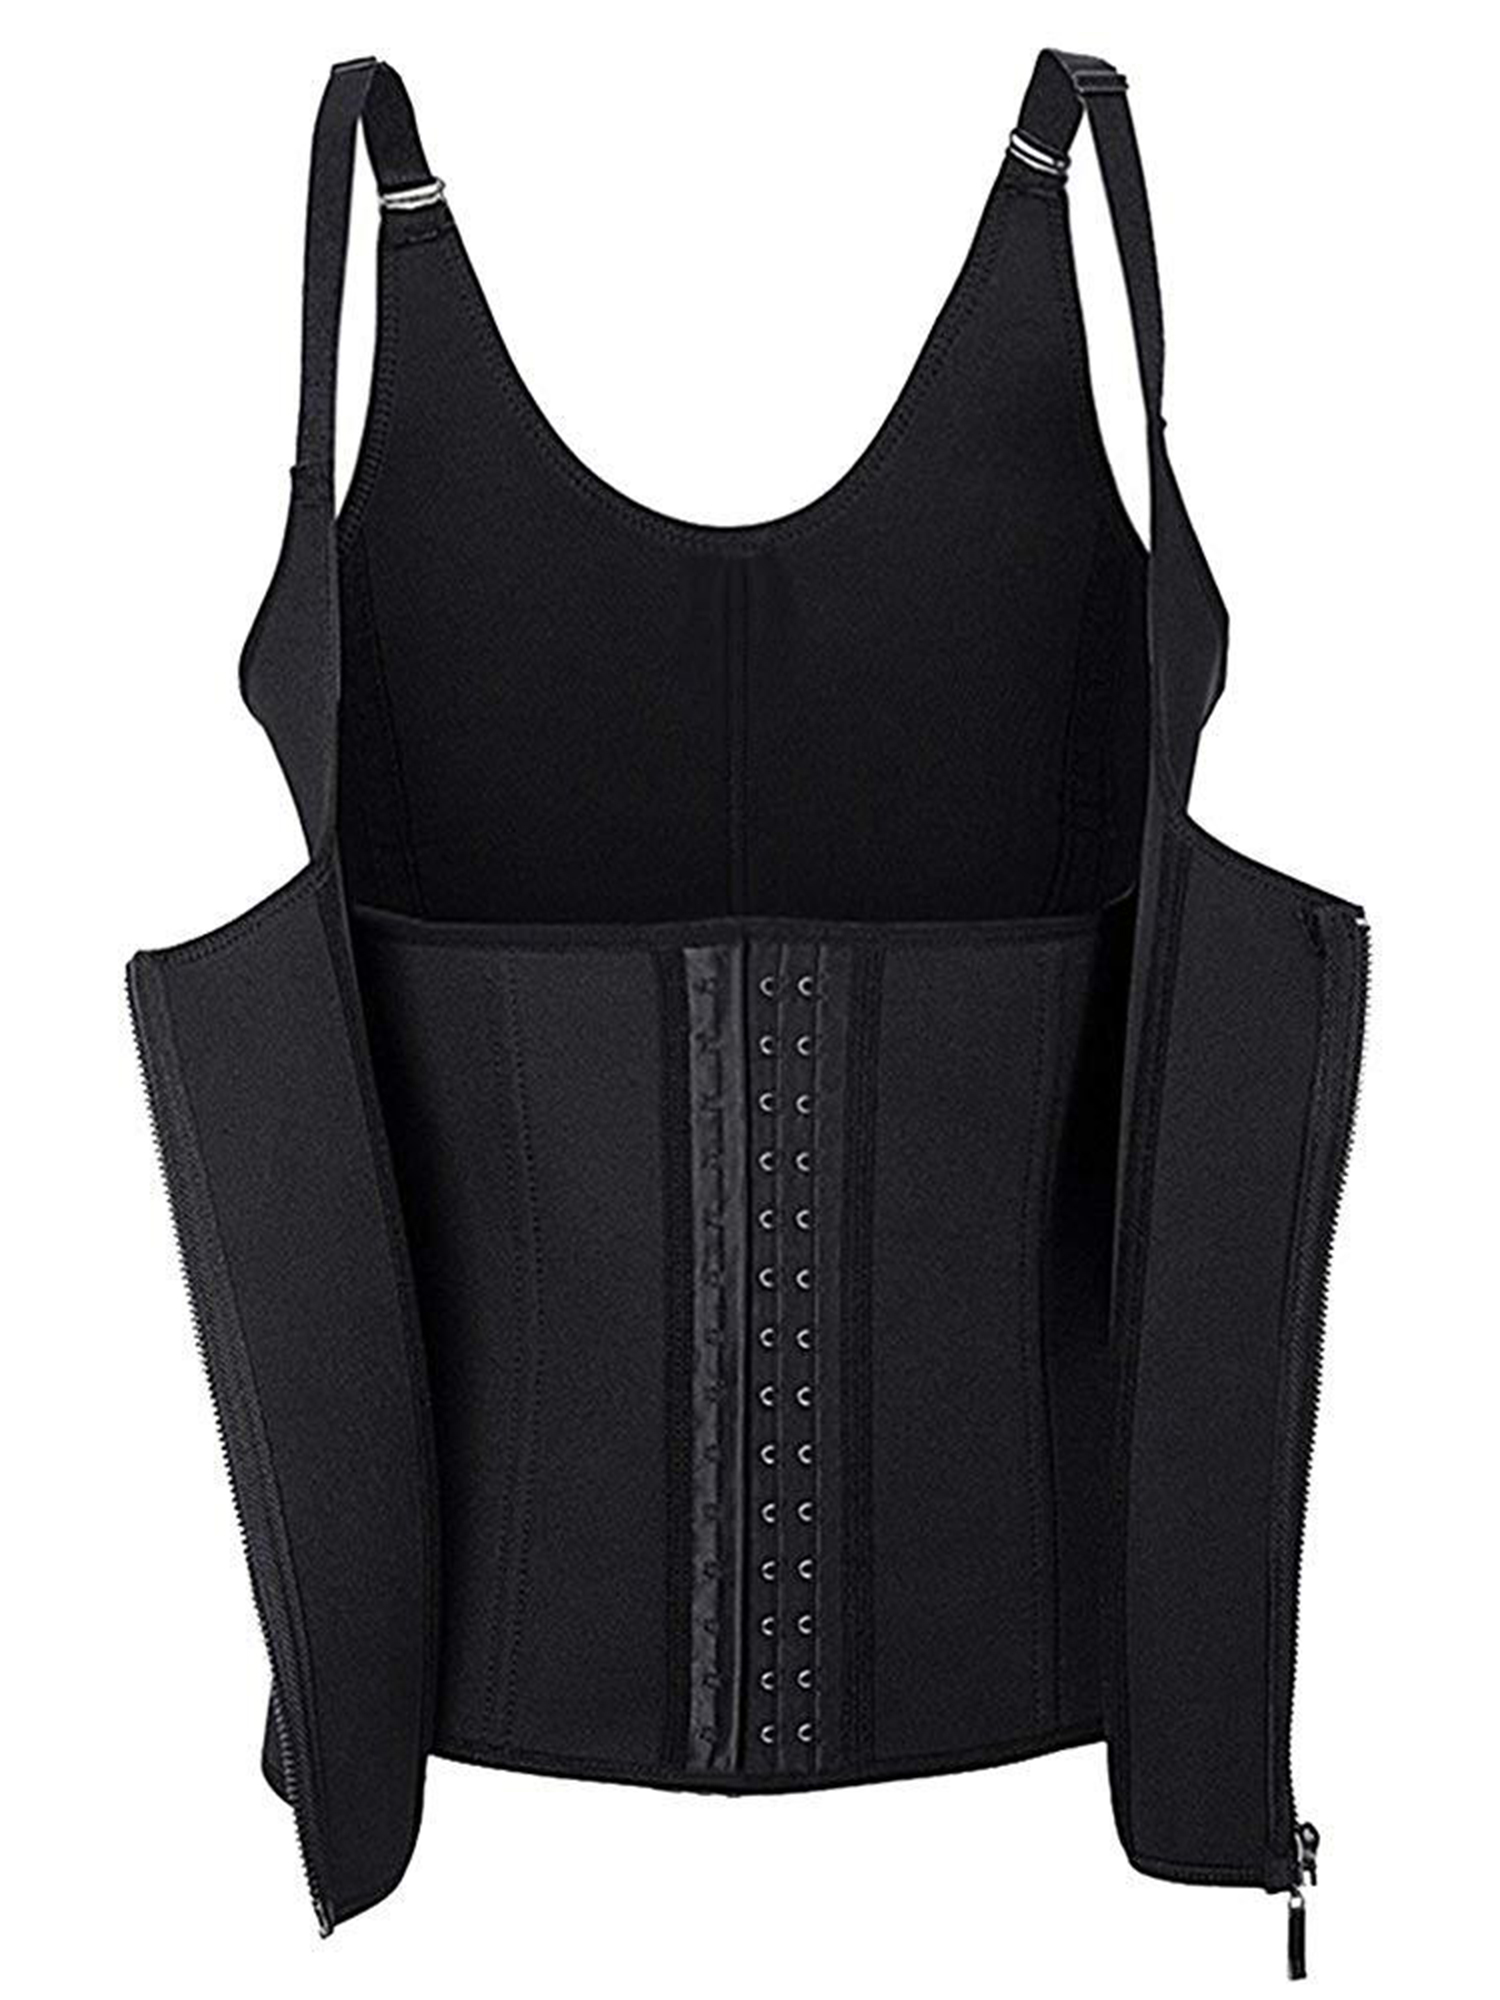 Waist Trainer Corset for Weight Loss Tummy Control Sport Workout Body Shaper Black